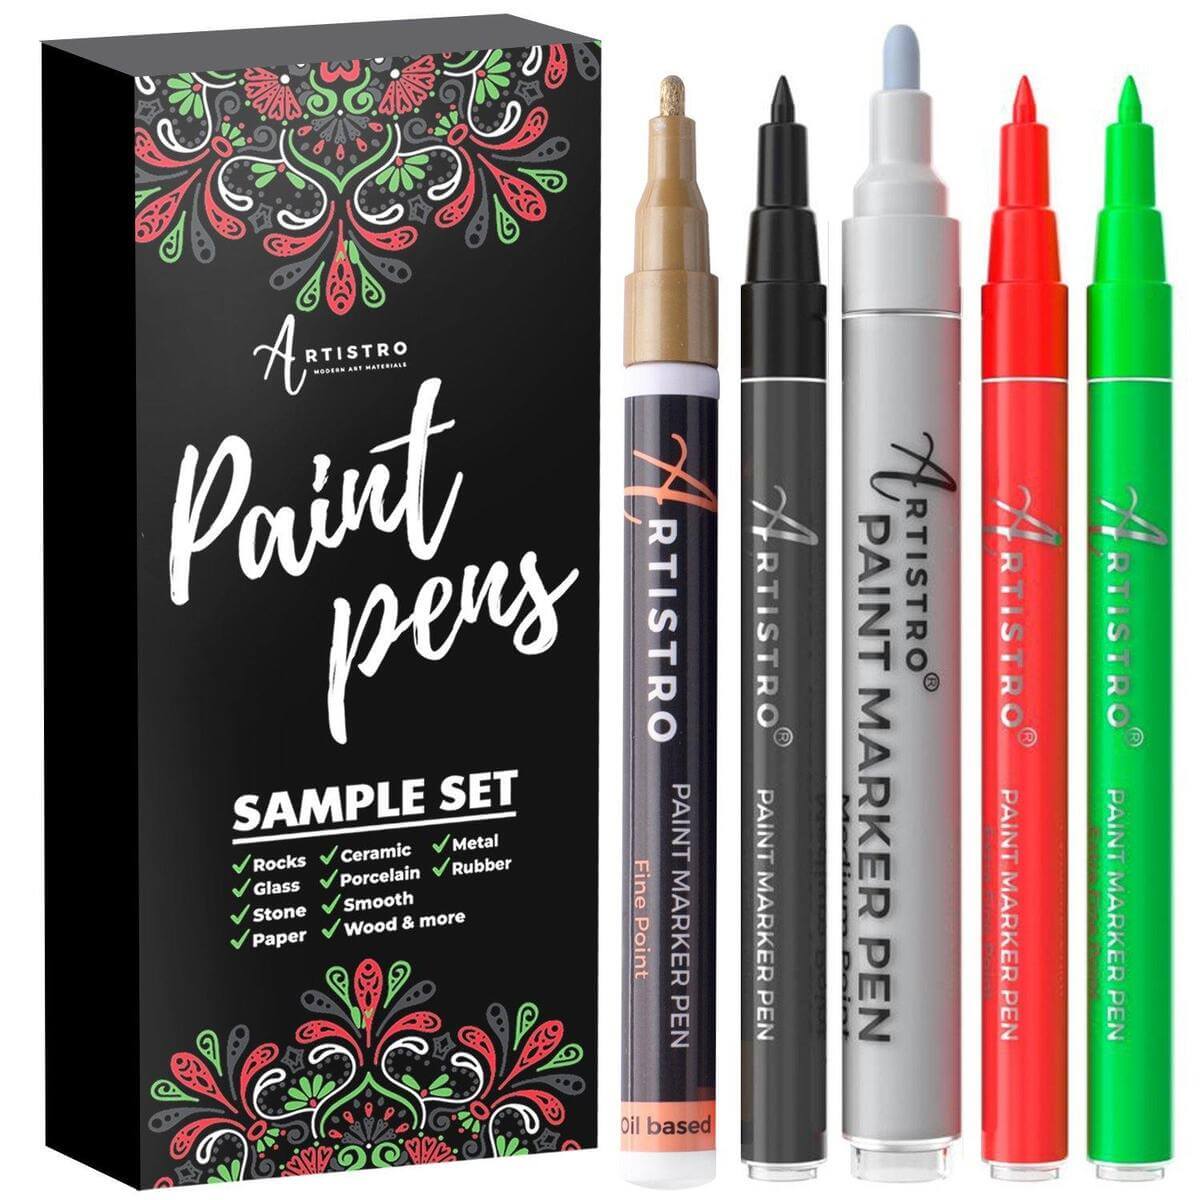 Fixed sample set - 5 paint pens (US only)